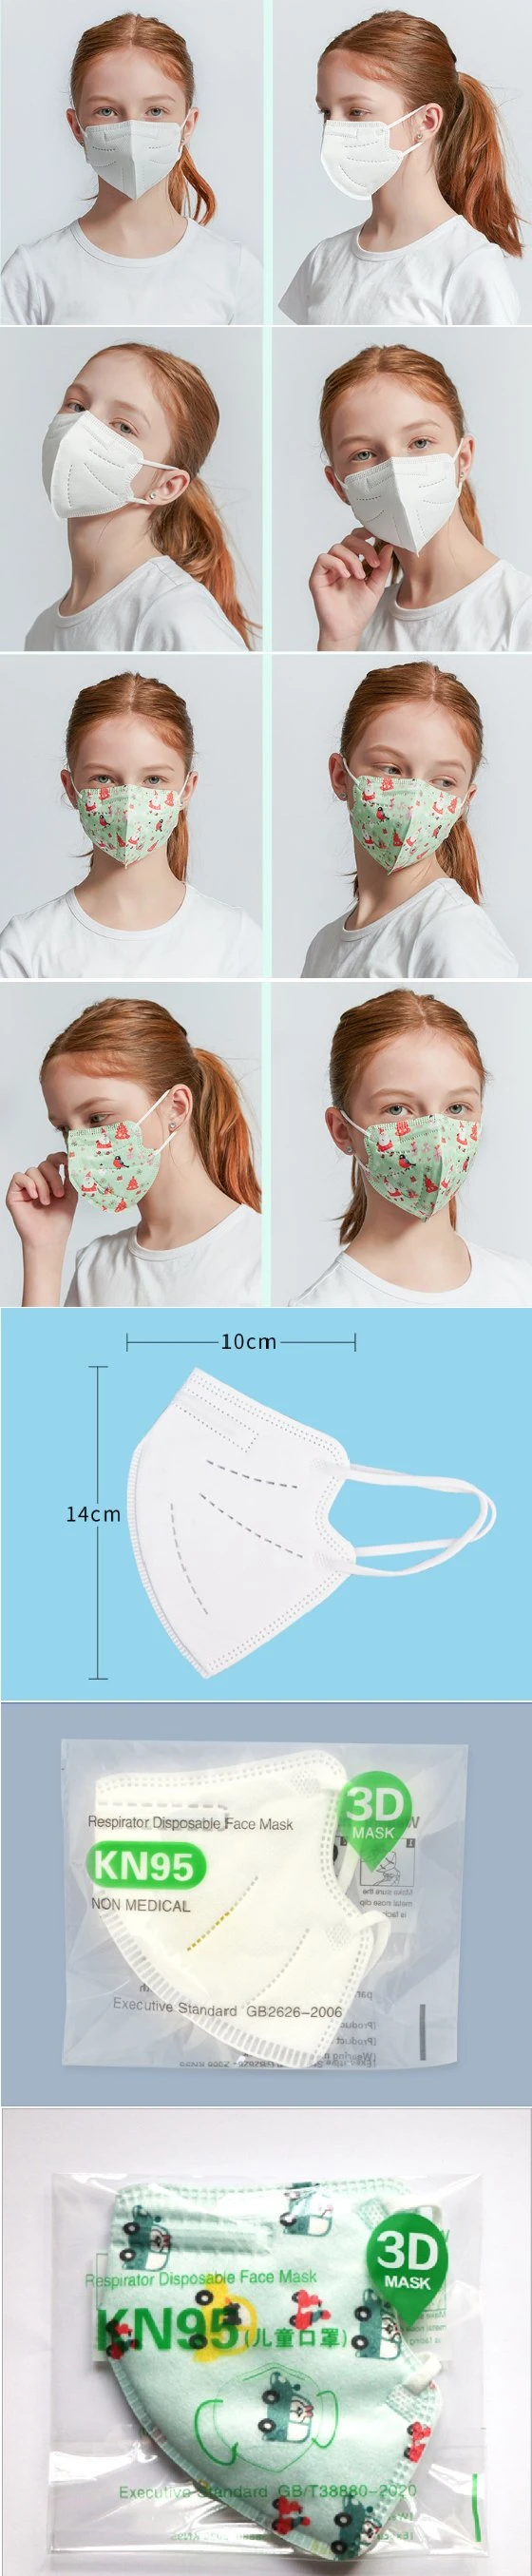 Medical Supply PP Melt-Blown Fabric, PP Nonwoven Fabric, Polypropylene Spunbond Meltblown Non Woven Face Mask Children KN95 Face Mask Without Breathing Valve